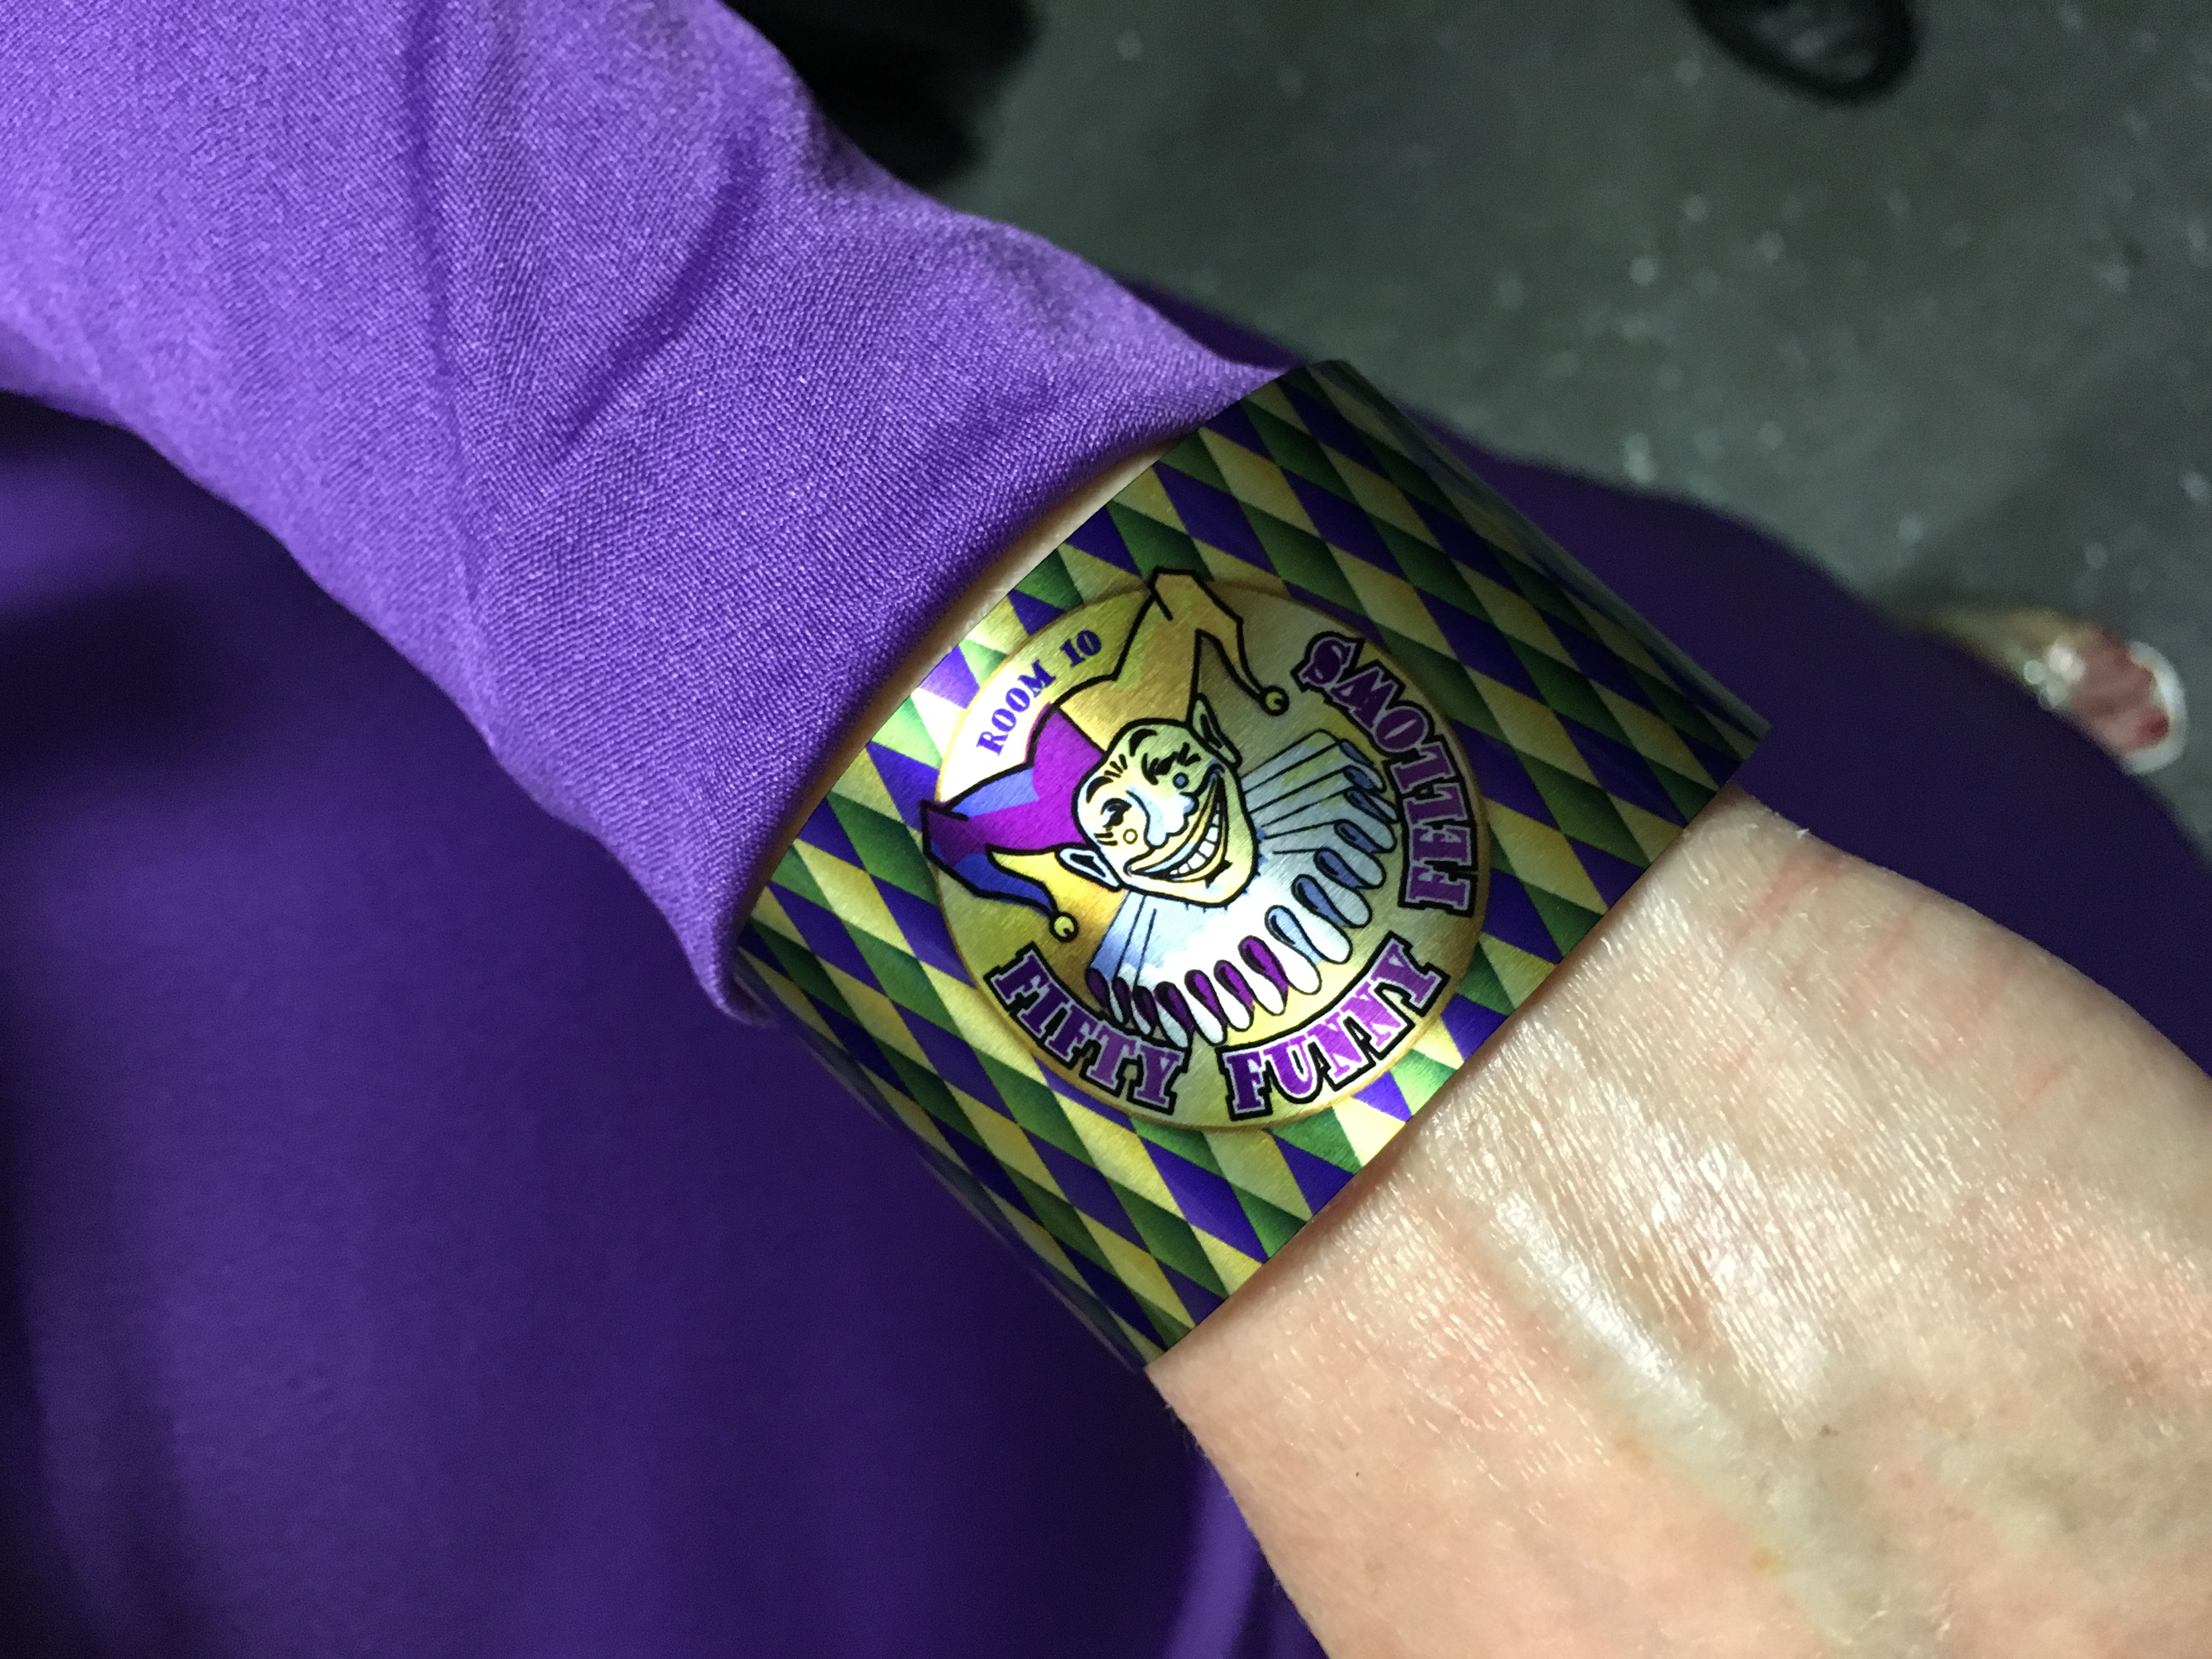 Mardi Gras Cuff Bracelet made with sublimation printing